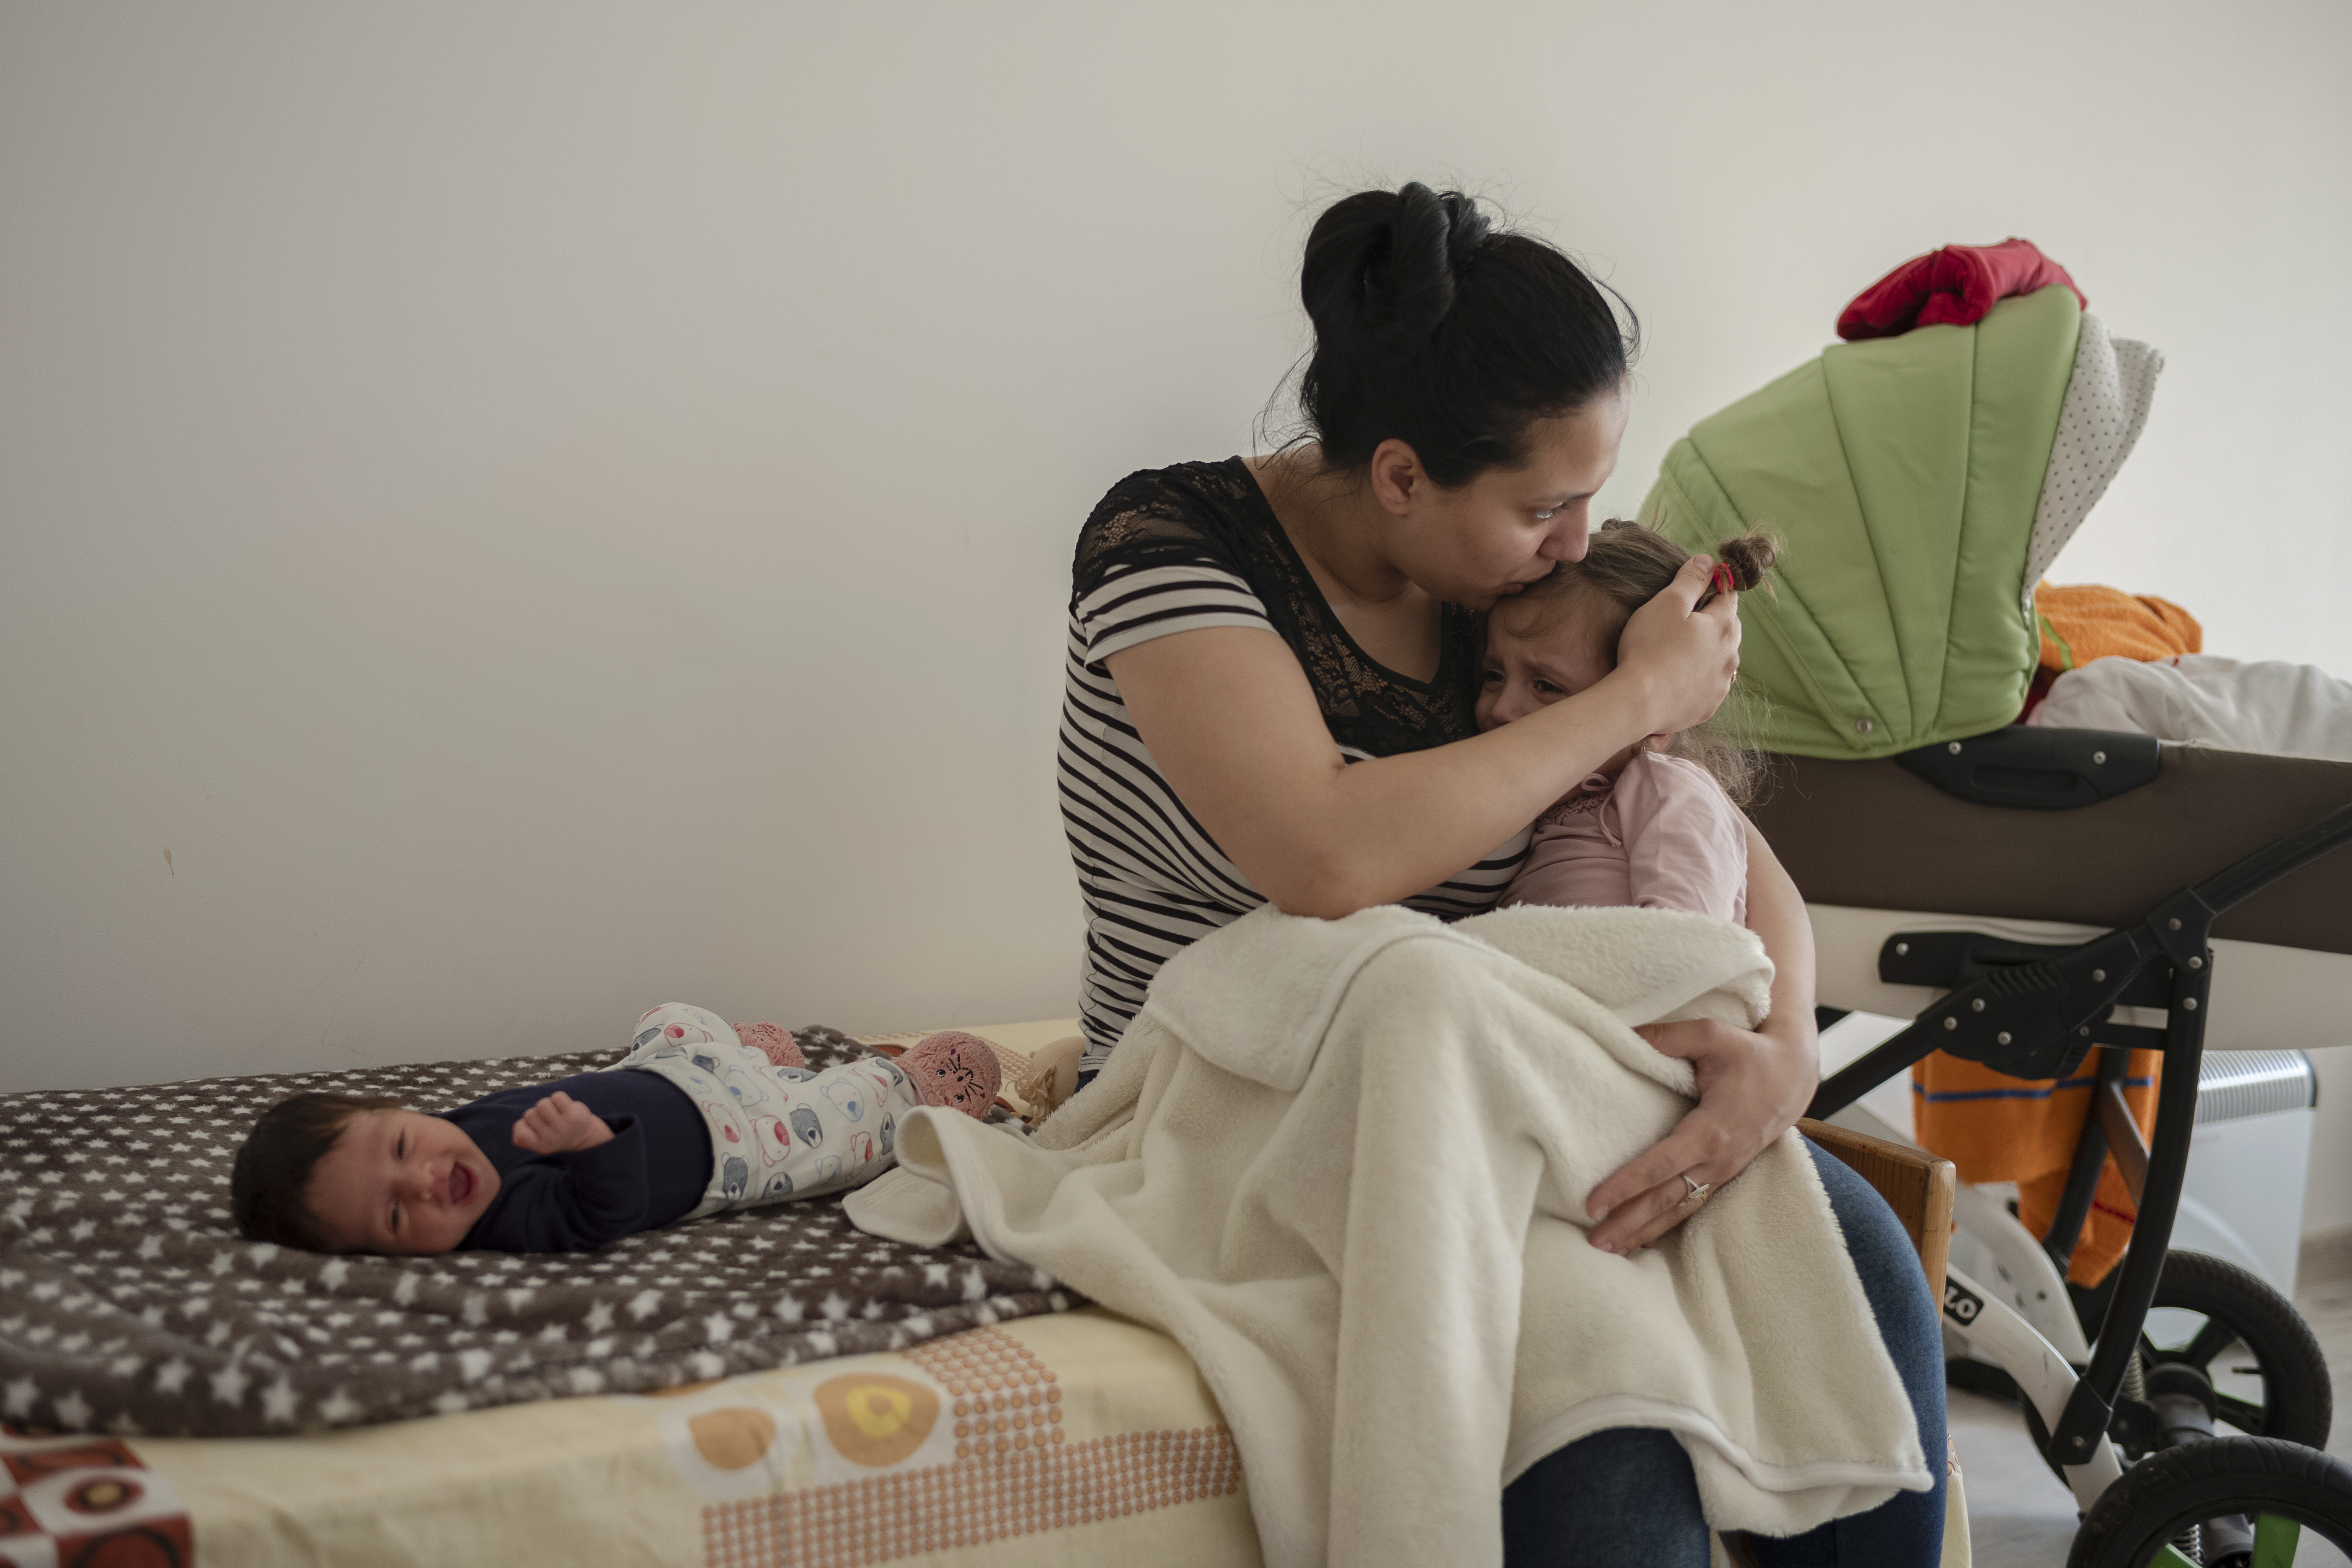 Svetlana Babaș with her two daughters, newborn Adelina (left) and 3-year-old Sofia (right), in the refugee center in Straseni, Moldova  . Photo: UN Women/Maxime Fossat